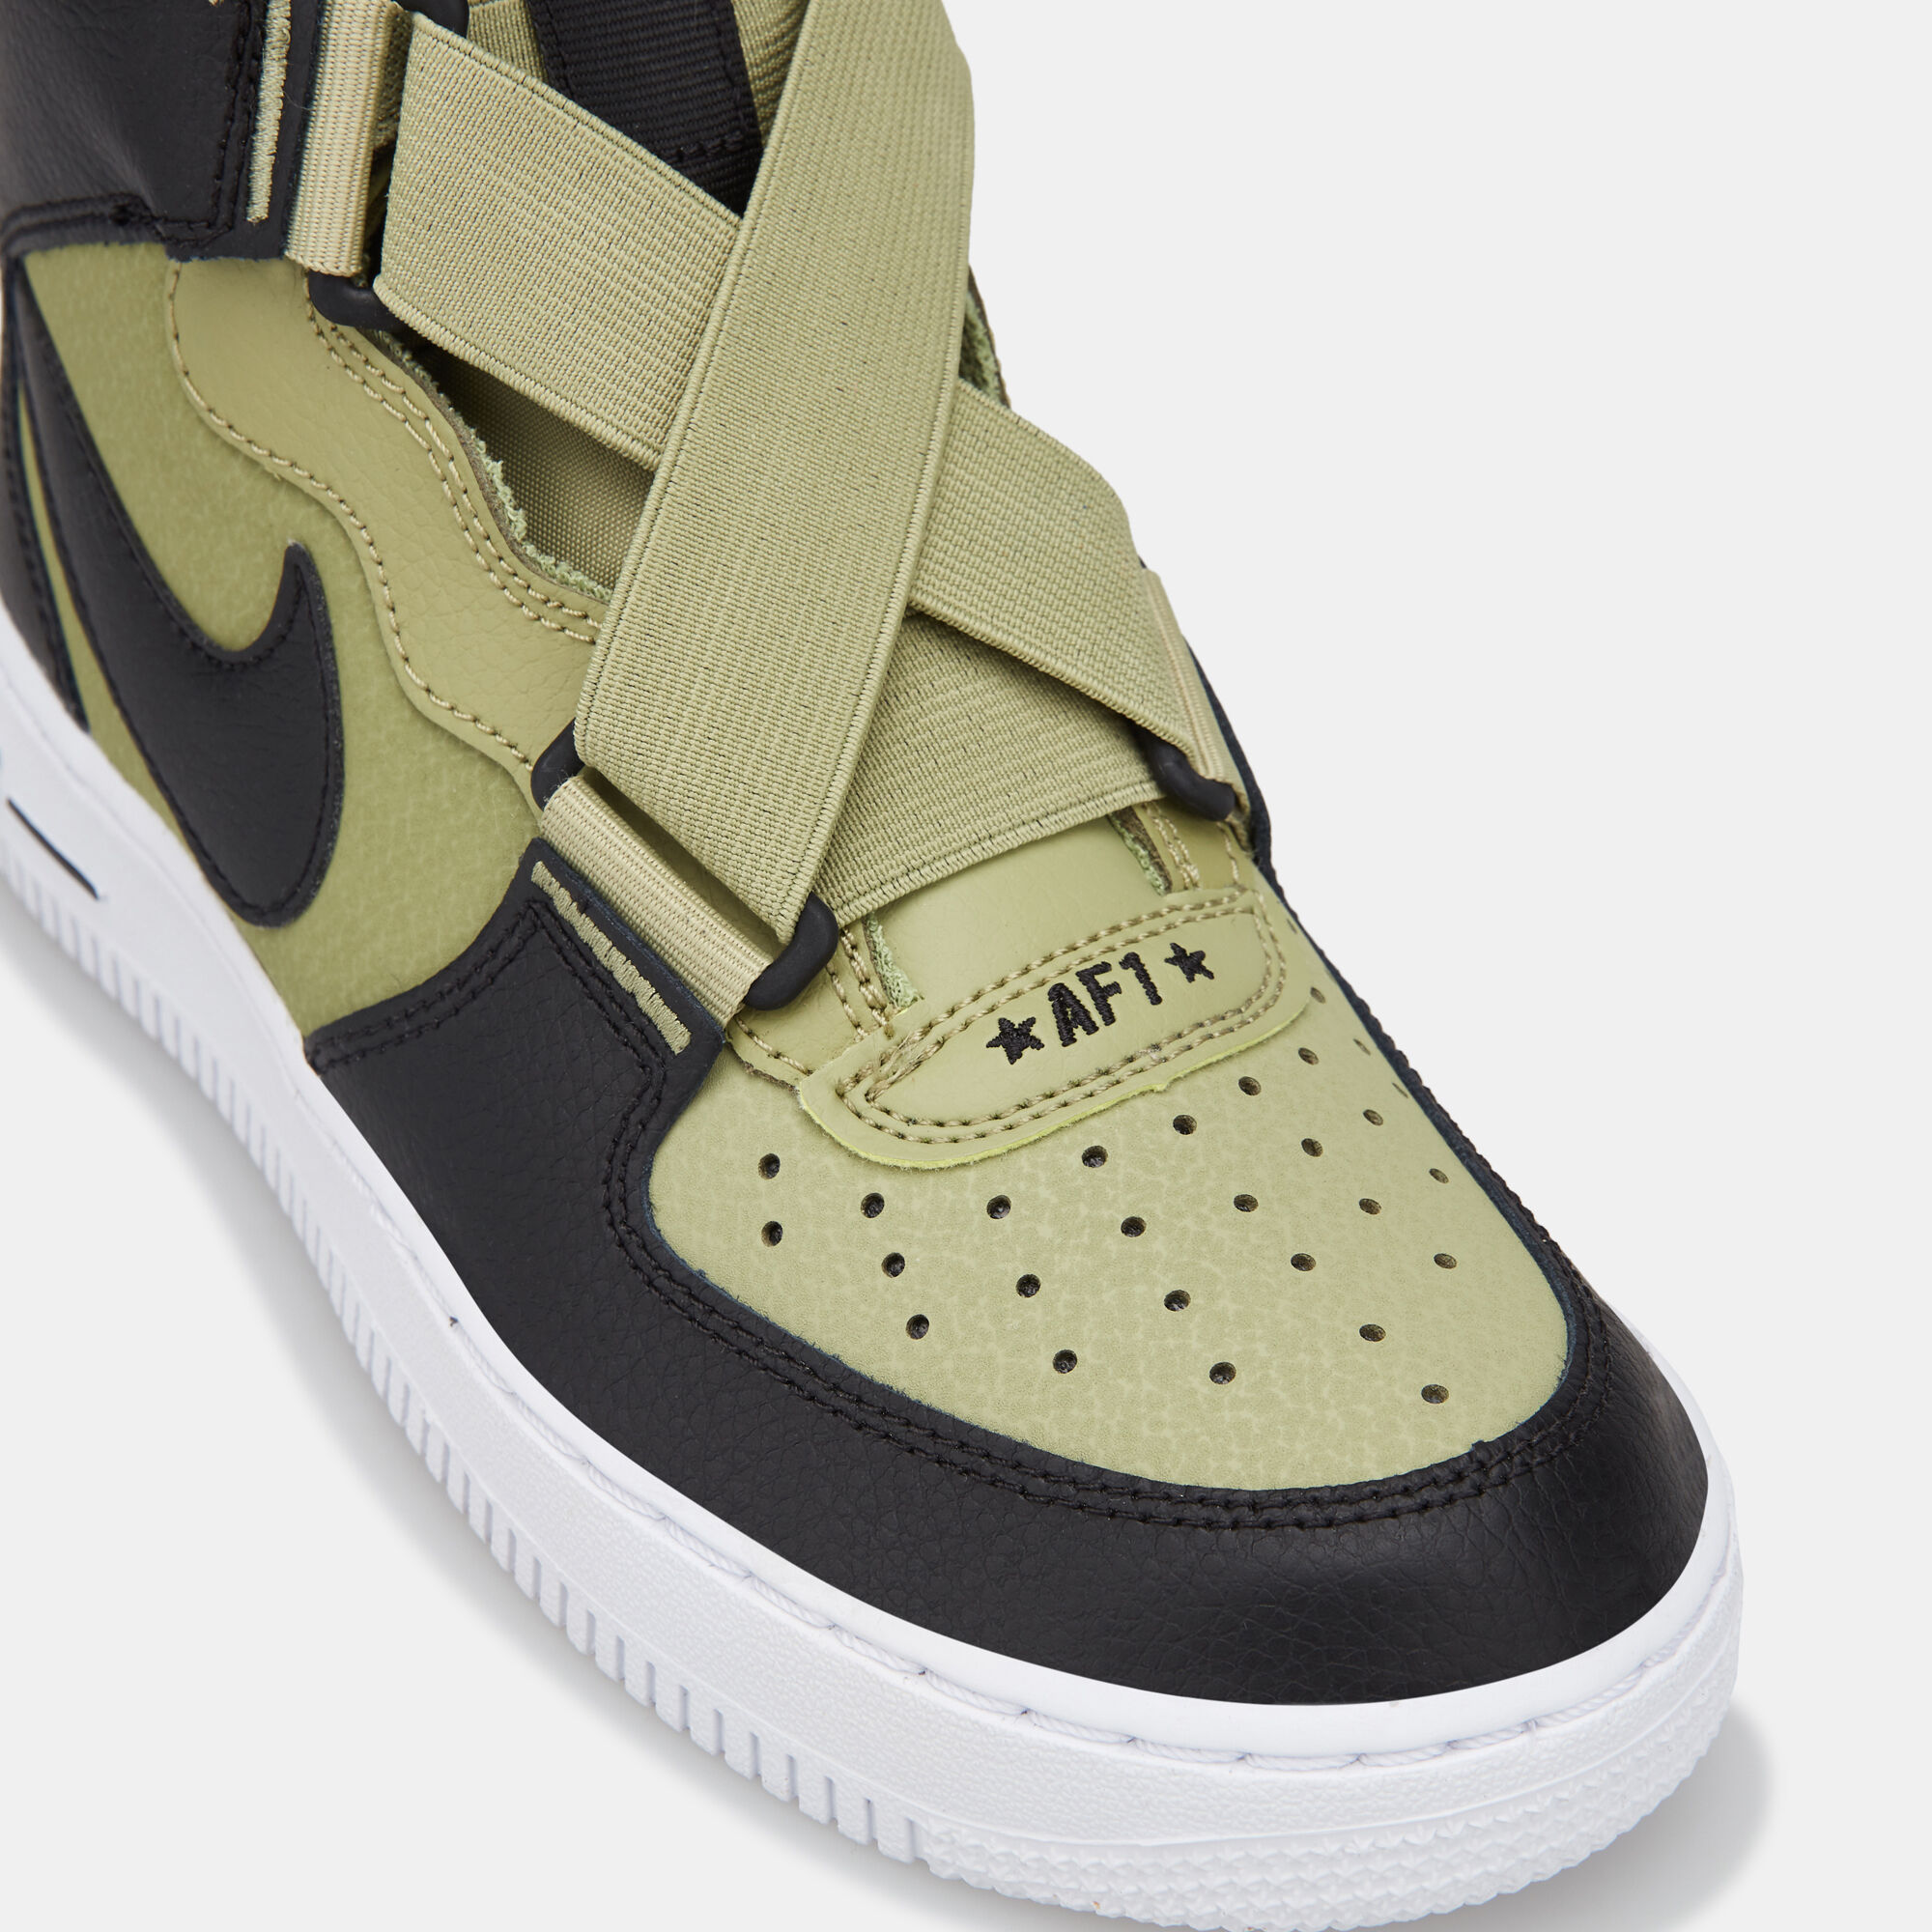 nike air force 1 highness green